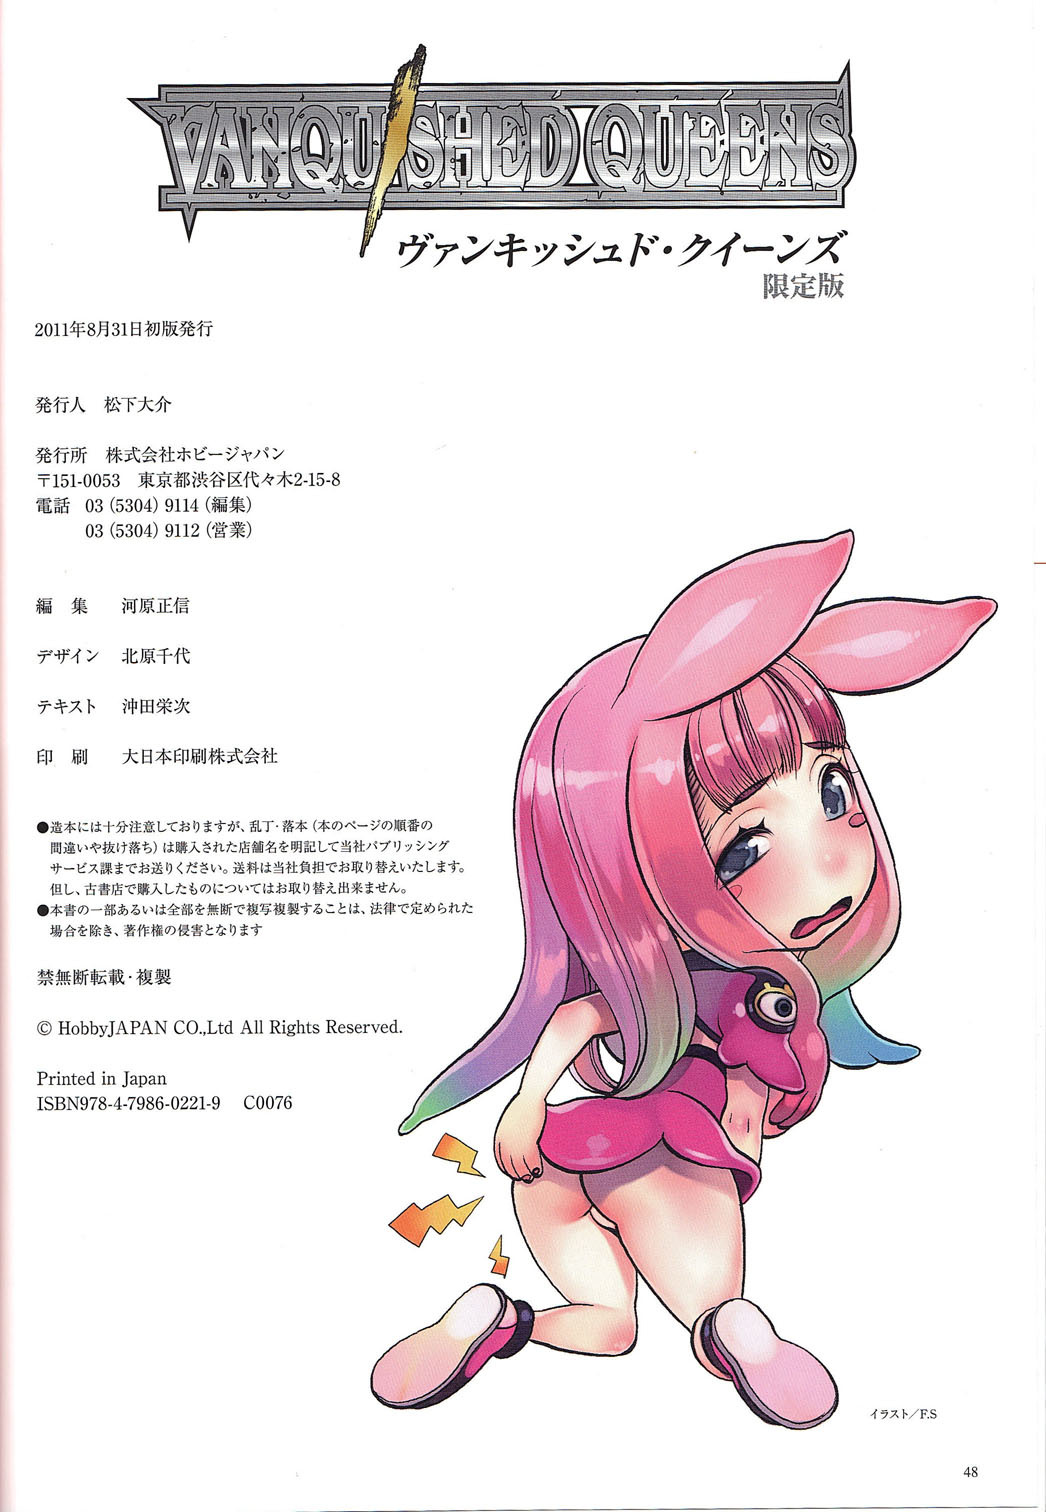 [Hobby JAPAN (Various)] Queen's Blade Kanzen Haiboku Gashuu Vanquished Queens 3 (Queen's Blade) [Incomplete] page 27 full